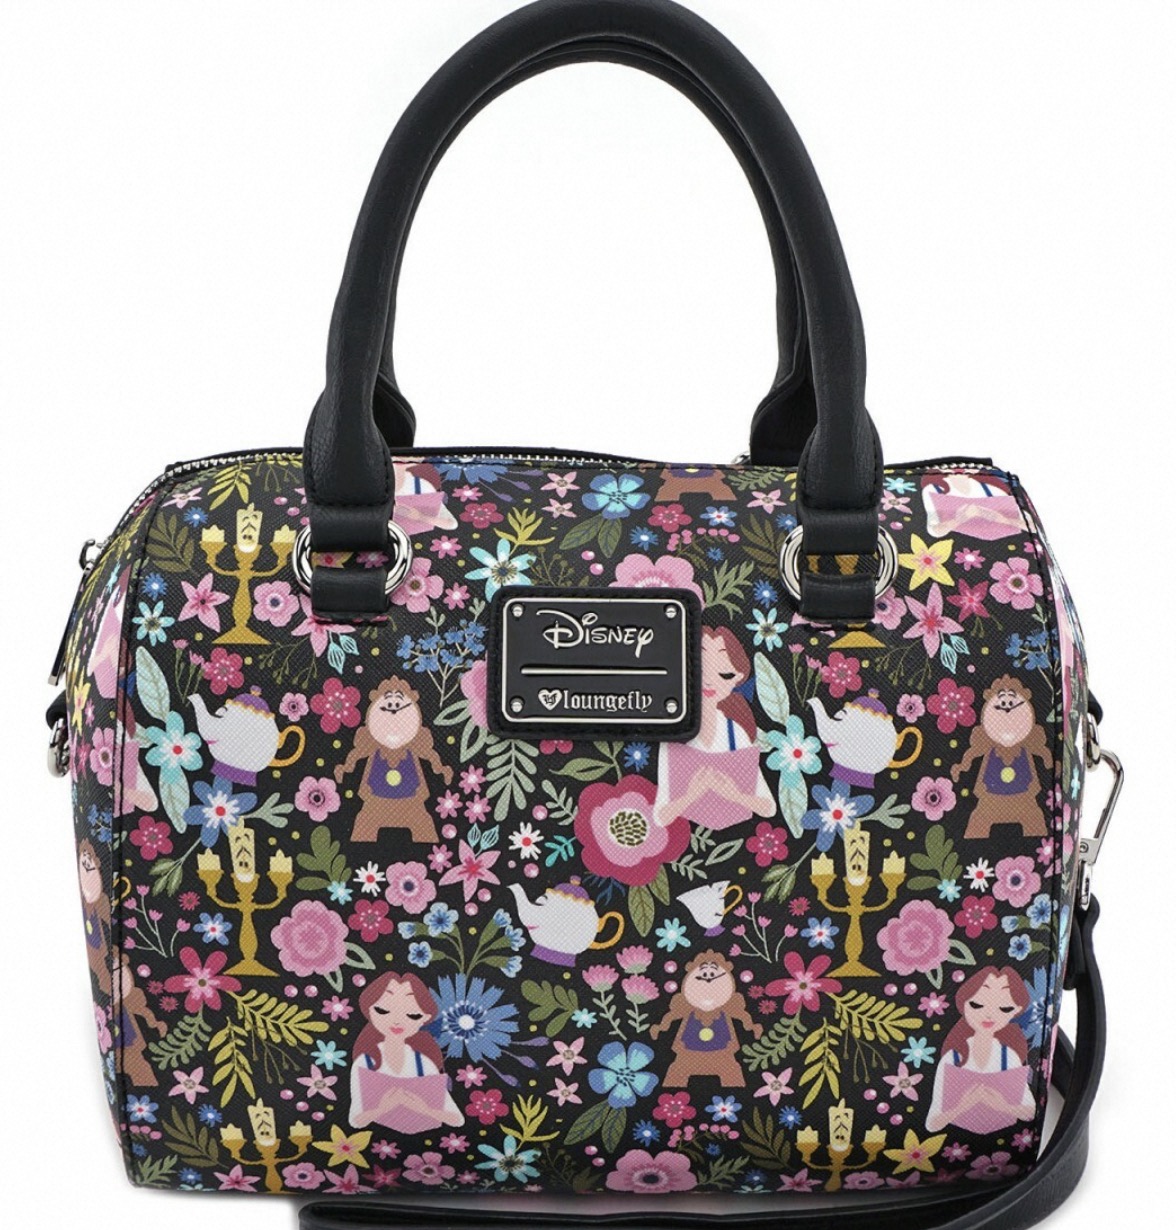 Disney Purses and Bags: Carry the Magic Everywhere插图4